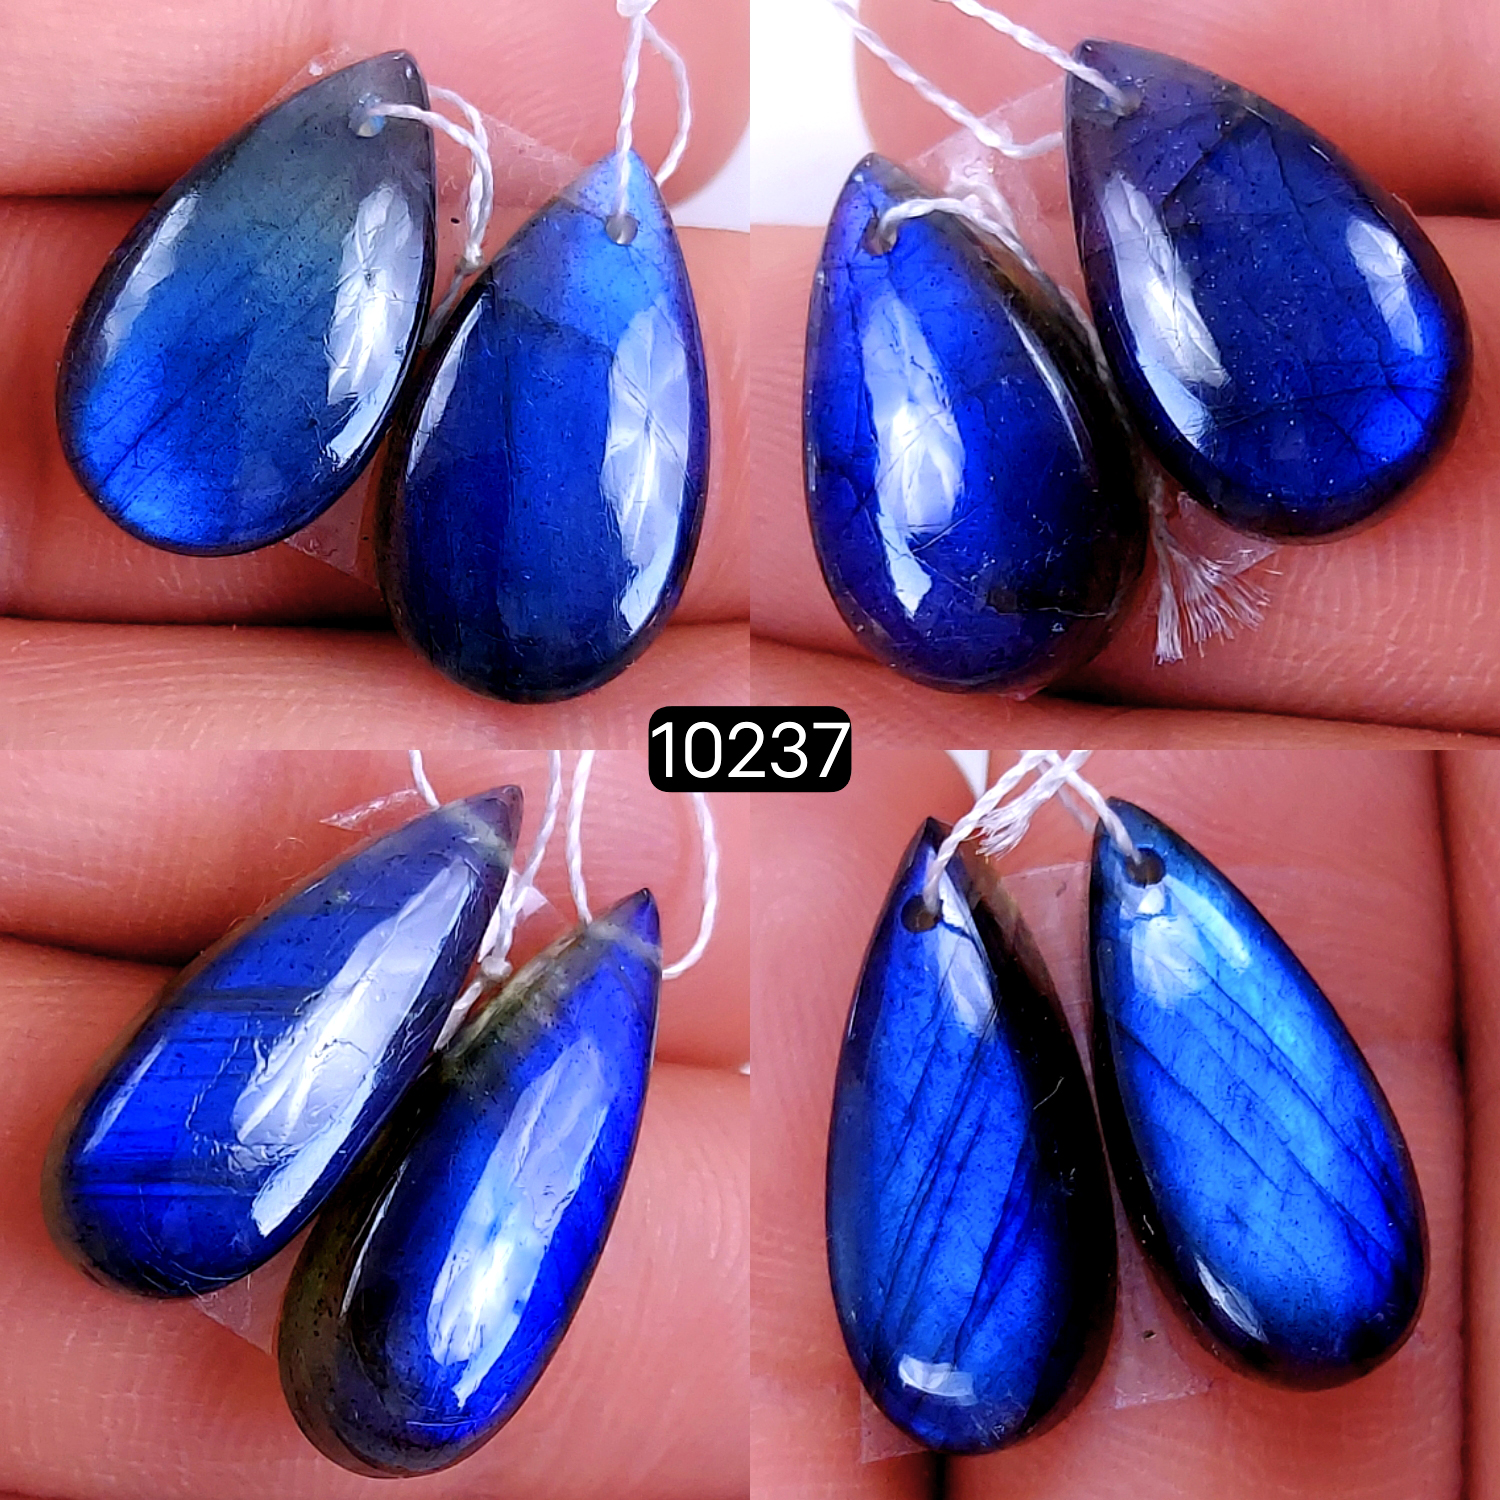 4Pair 67Cts Natural Labradorite Crystal Drill Dangle Drop Earring Pairs Silver Earrings Blue Labradorite Hoop Jewelry  20x7 18x10mm #10237